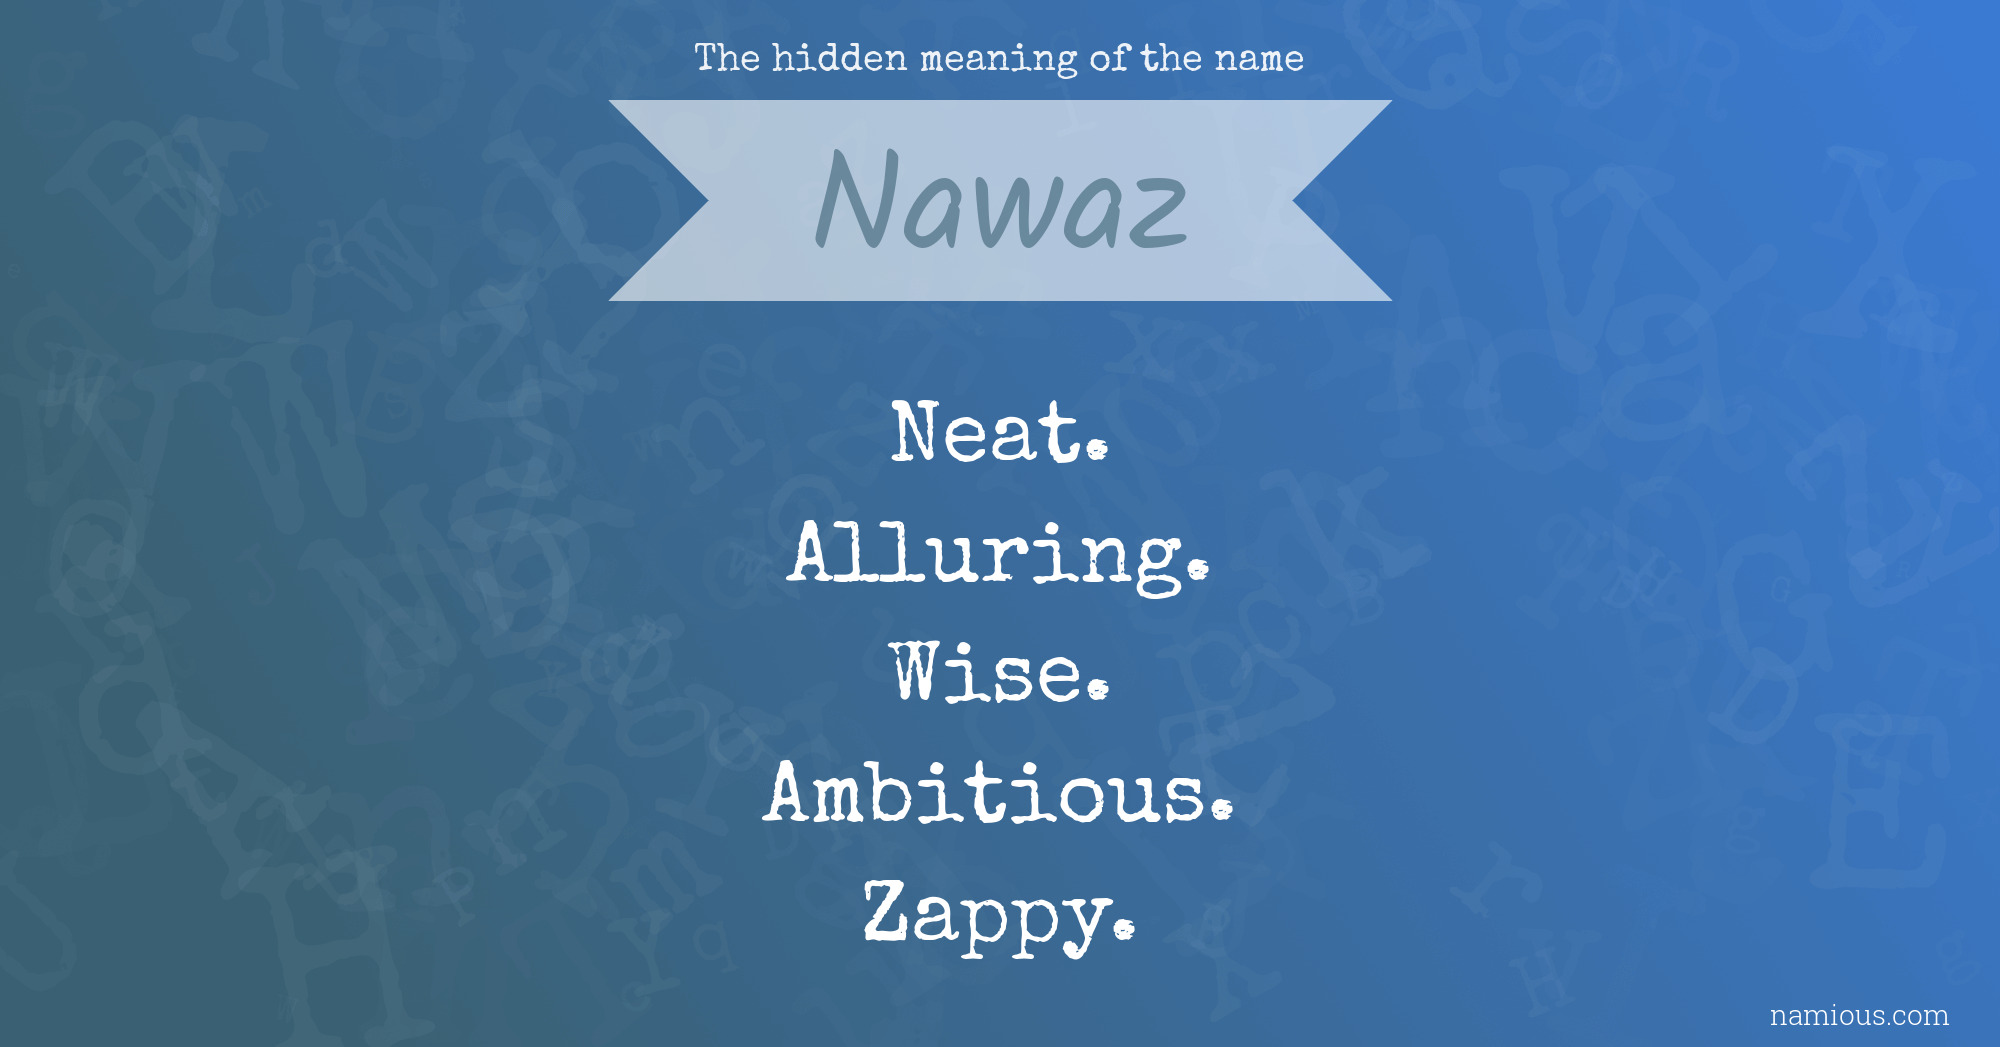 The hidden meaning of the name Nawaz